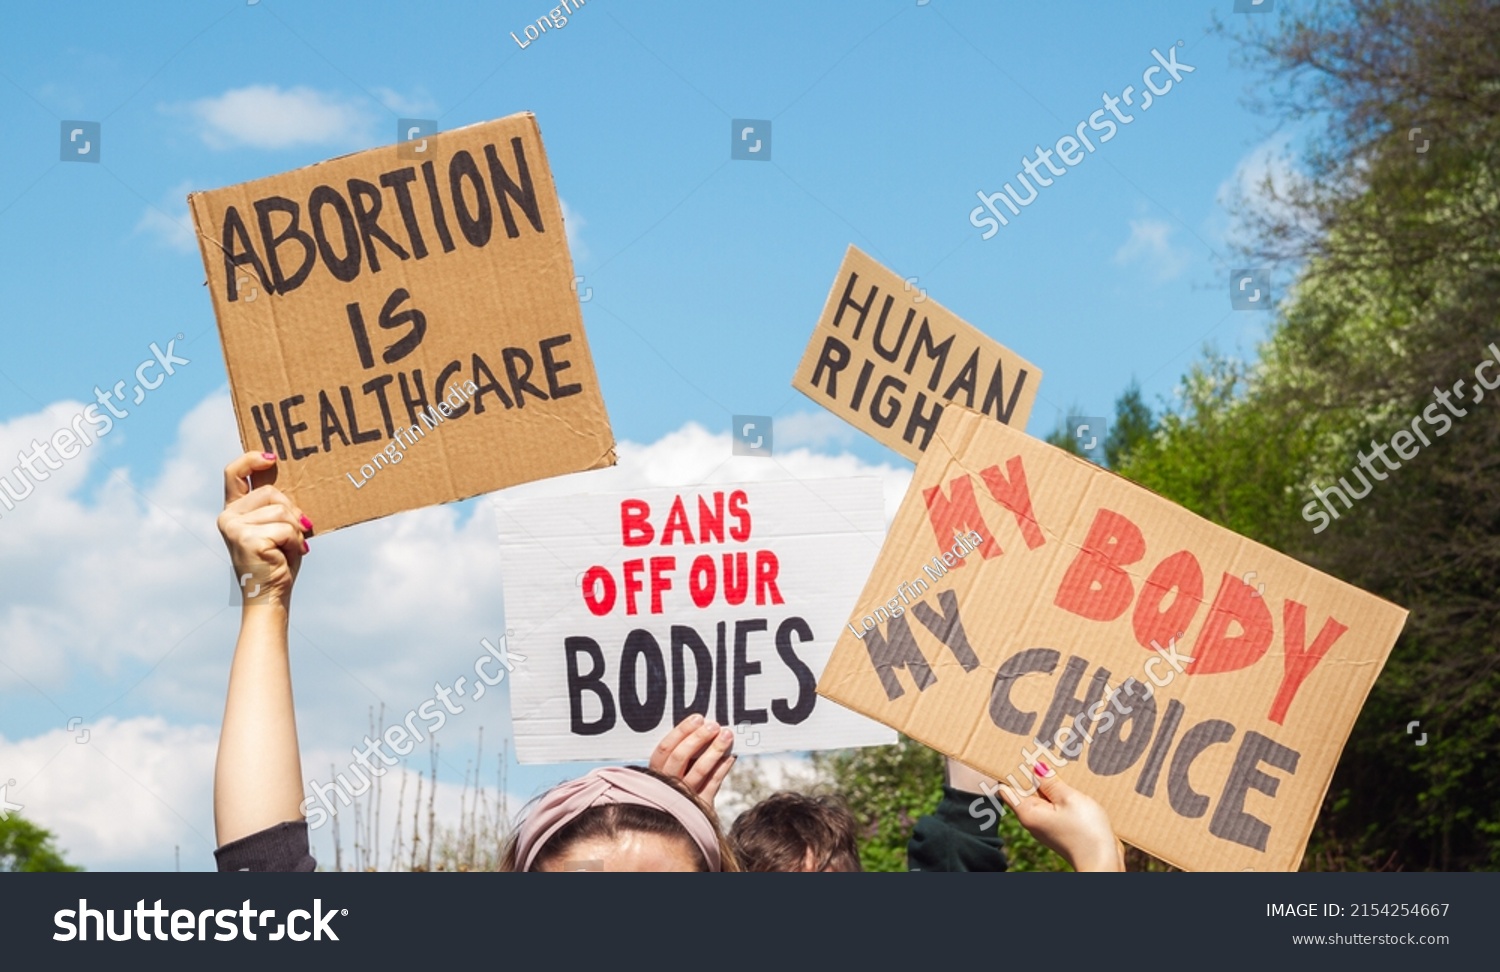 Protesters holding signs Abortion Is Healthcare, My Body My Choice, Bans Off Our Bodies, Human rights. People with placards supporting abortion rights at protest rally demonstration. #2154254667